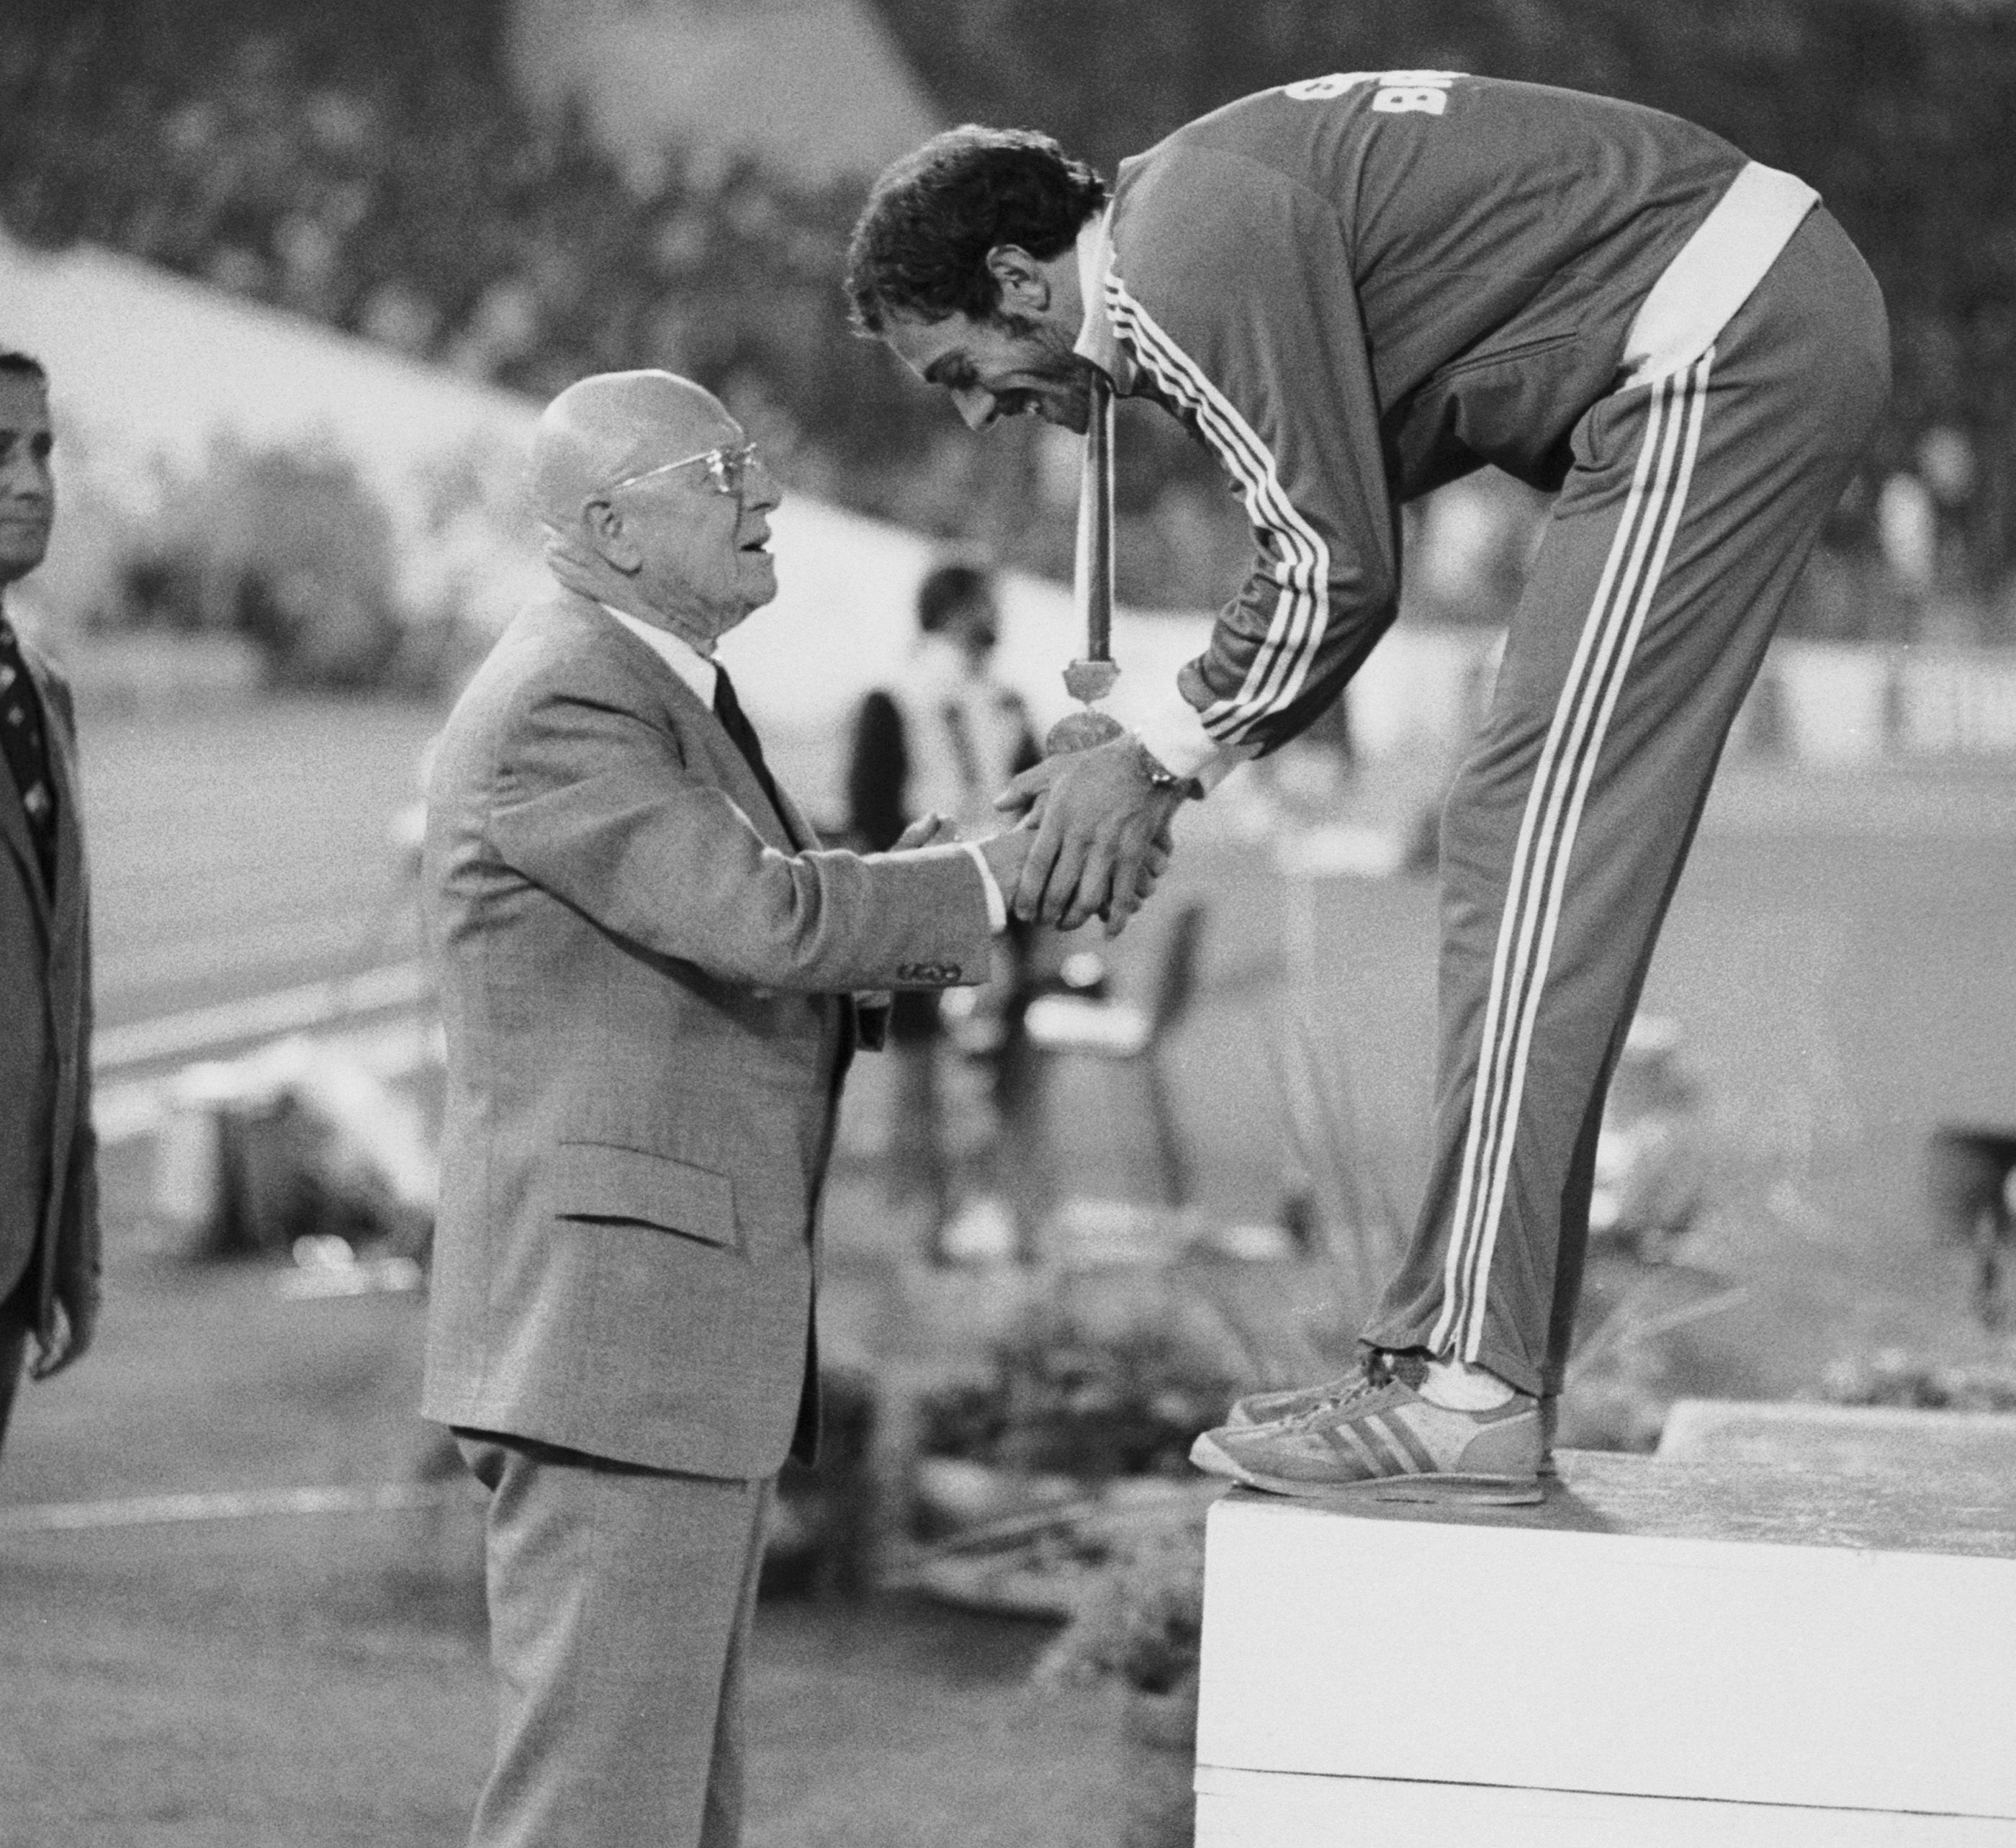 Adriaan Paulen awards Steve Ovett with his 1500m gold medal at the 1978 European Championships in Prague